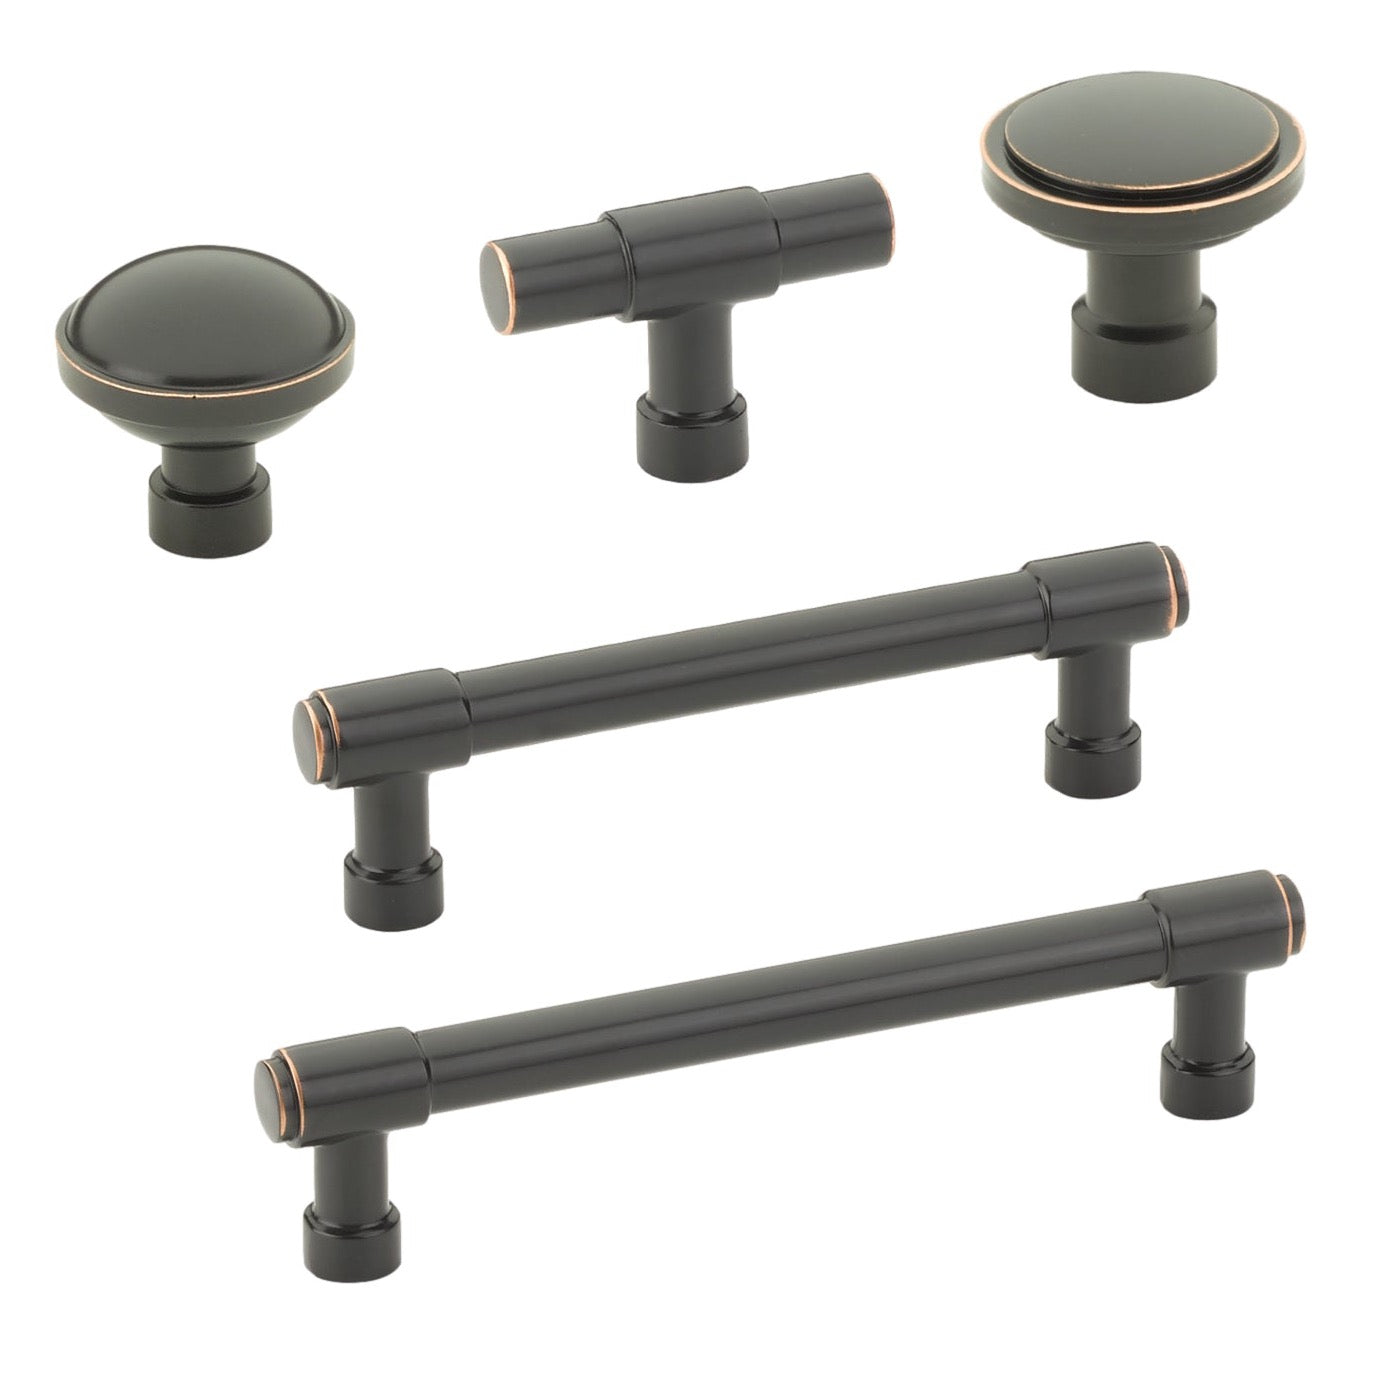 Oil Rubbed Bronze "Industry" Cabinet Knobs and Drawer Pulls - Industry Hardware